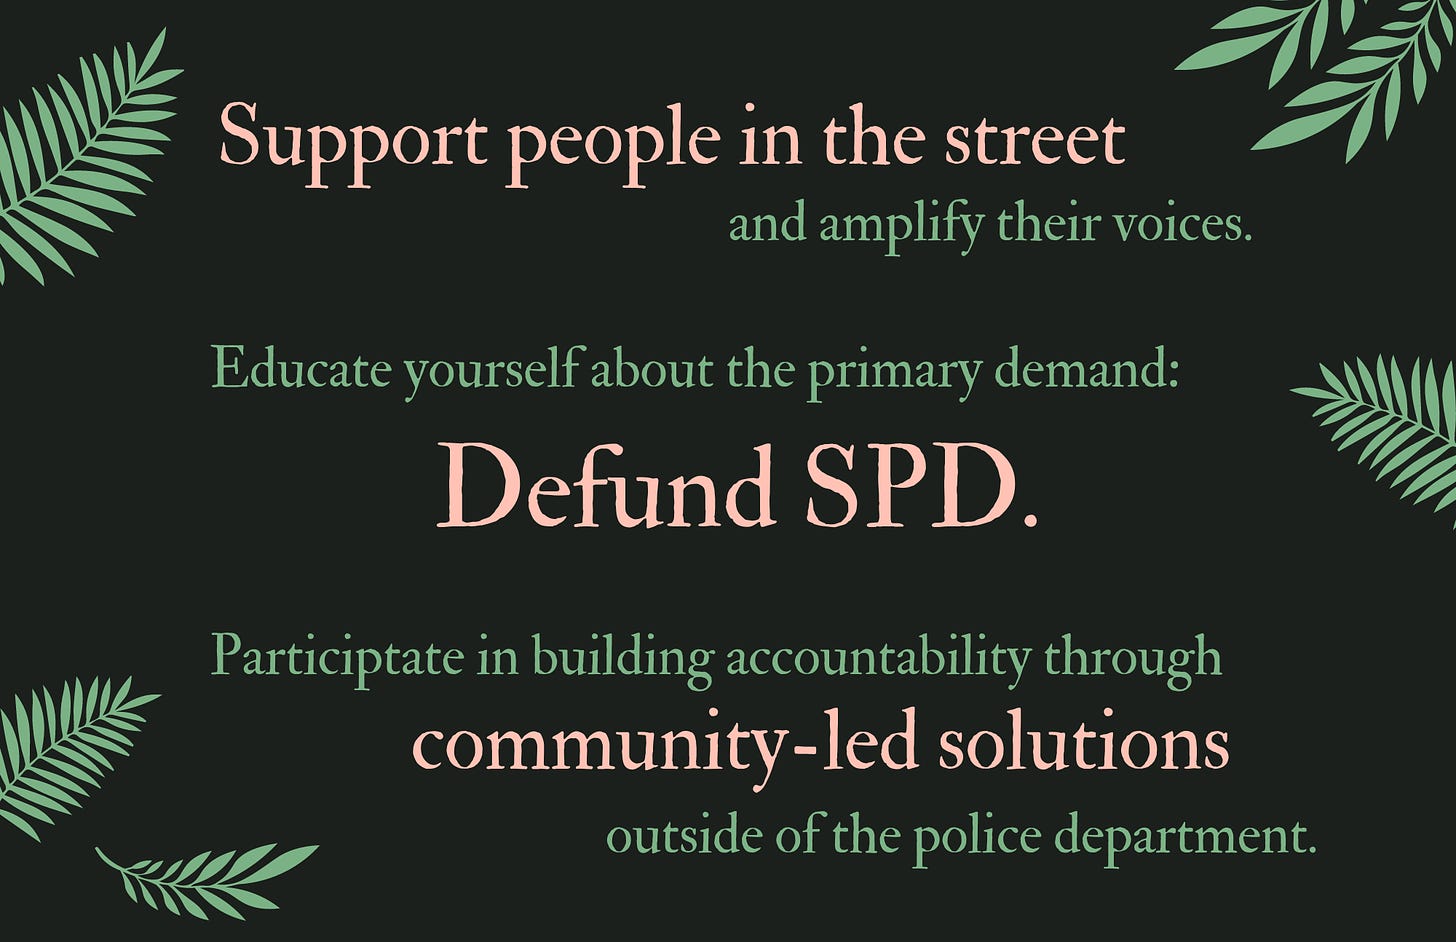 Support people in the street and amplify their voices. Educate yourself about the primary demand: Defund SPD. Participate in building accountability through community-led solutions outside of the police department.